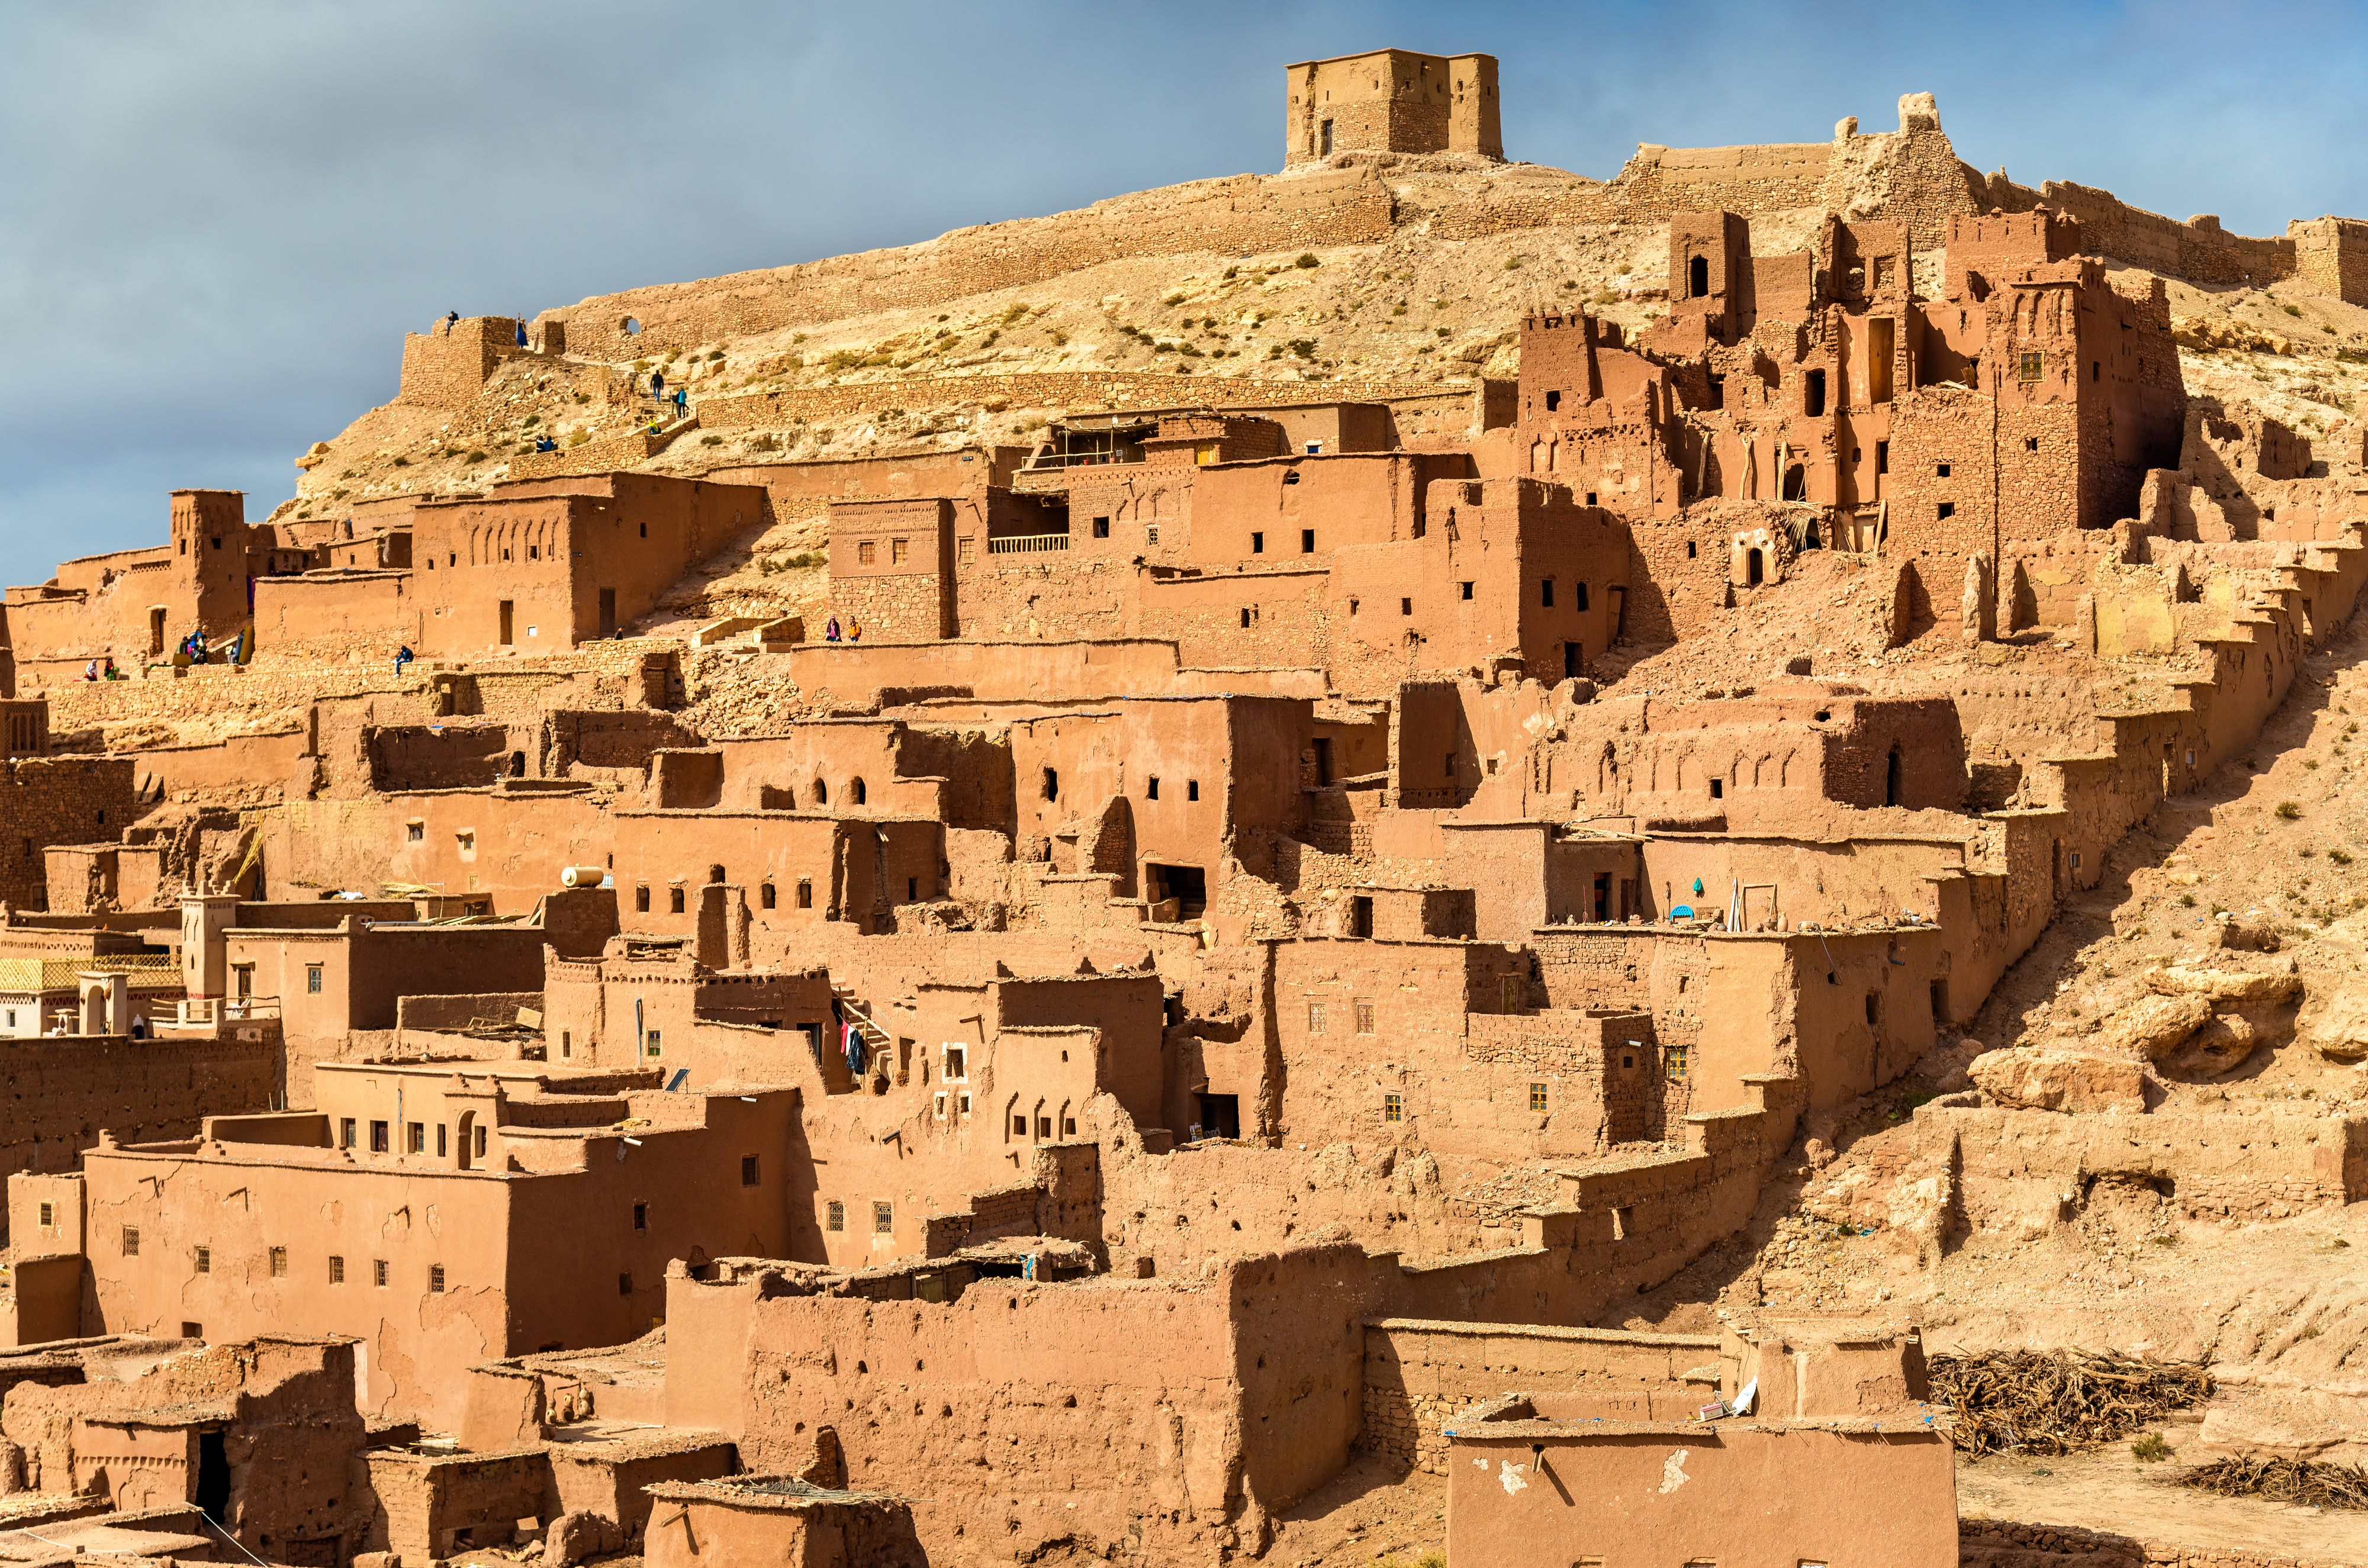 Traditional clay houses in Ait Ben Haddou village, a UNESCO world heritage site in Morocco